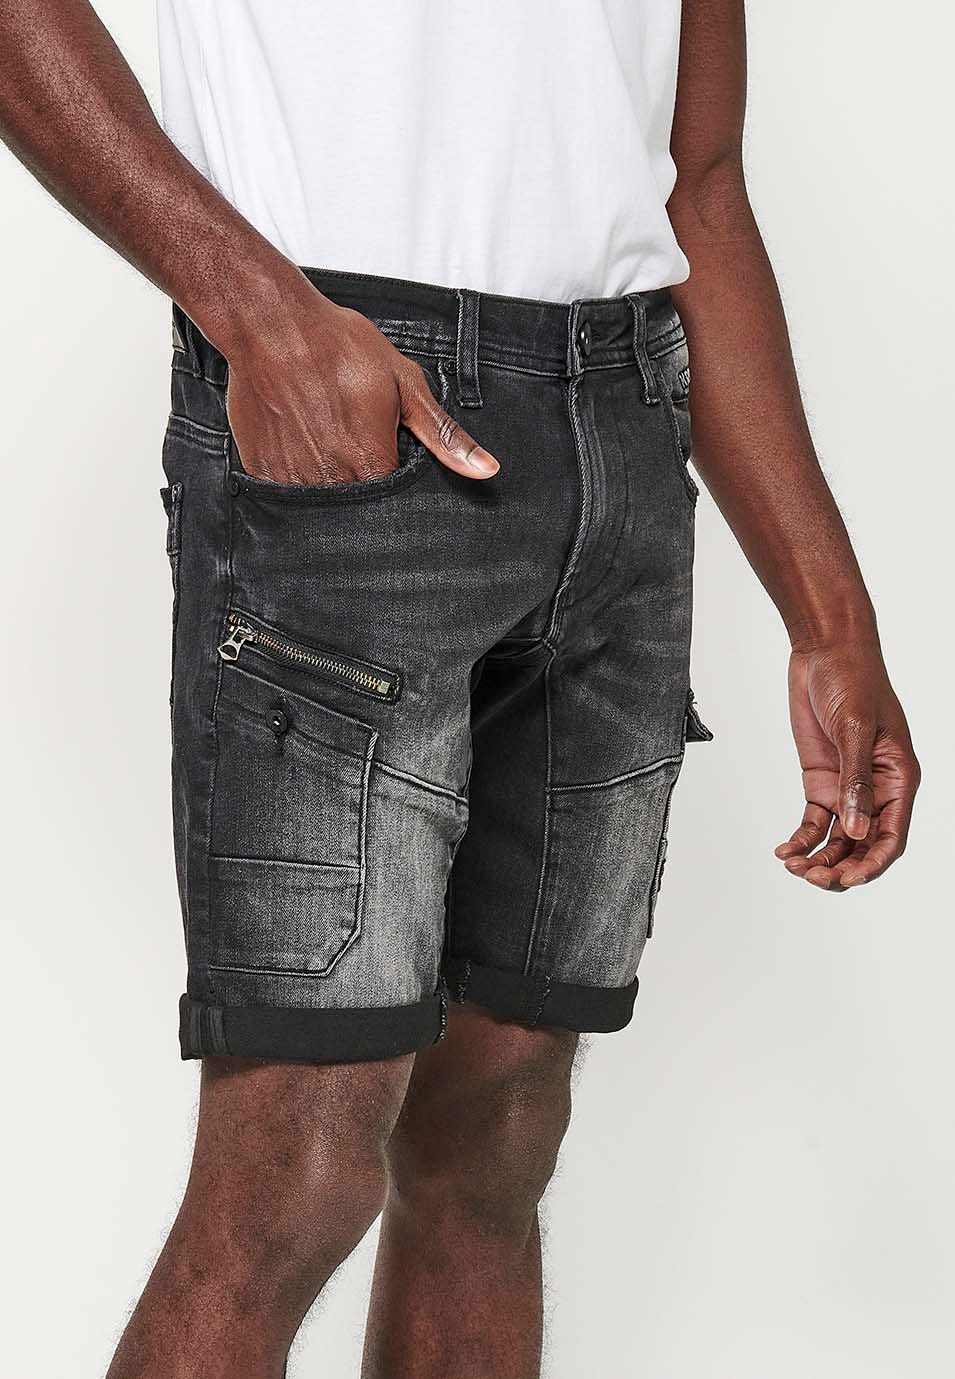 Shorts with Turn-up Finish and Front Closure with Zipper and Button with Five Pockets, One Pocket Pocket and Front Details in Black for Men 5